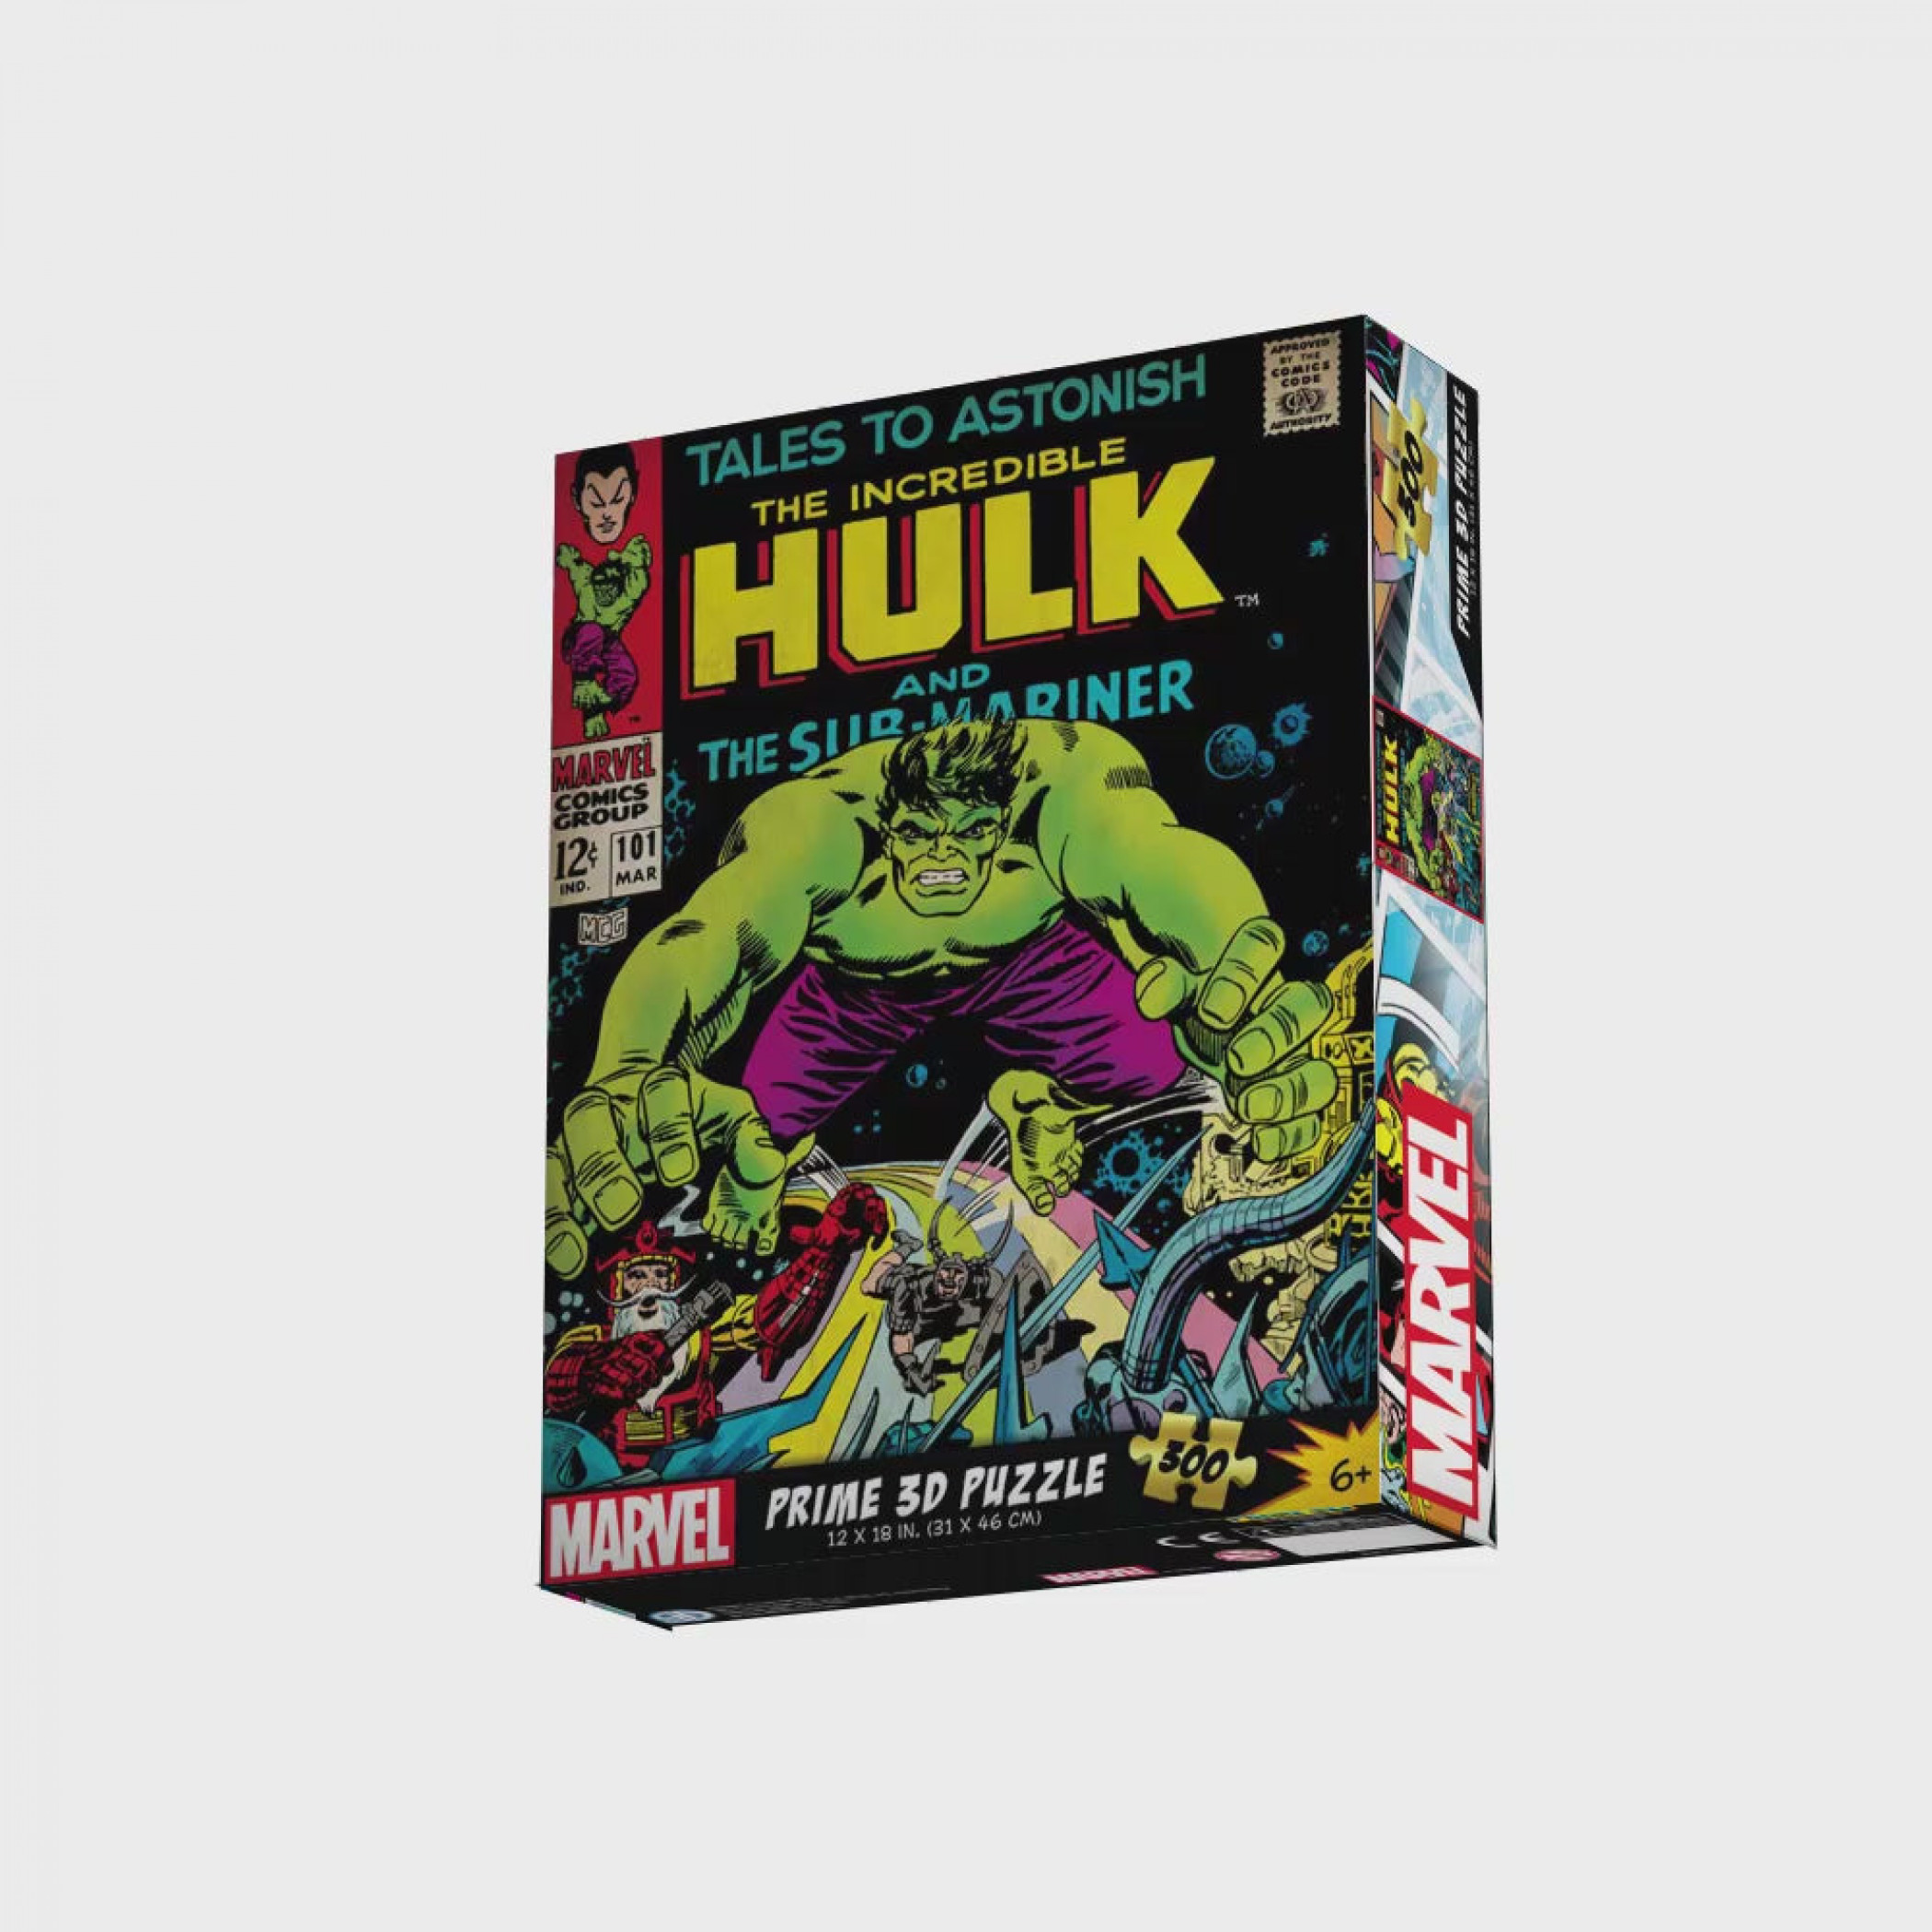 The Incredible Hulk #101 3D Lenticular 300pc Jigsaw Puzzle